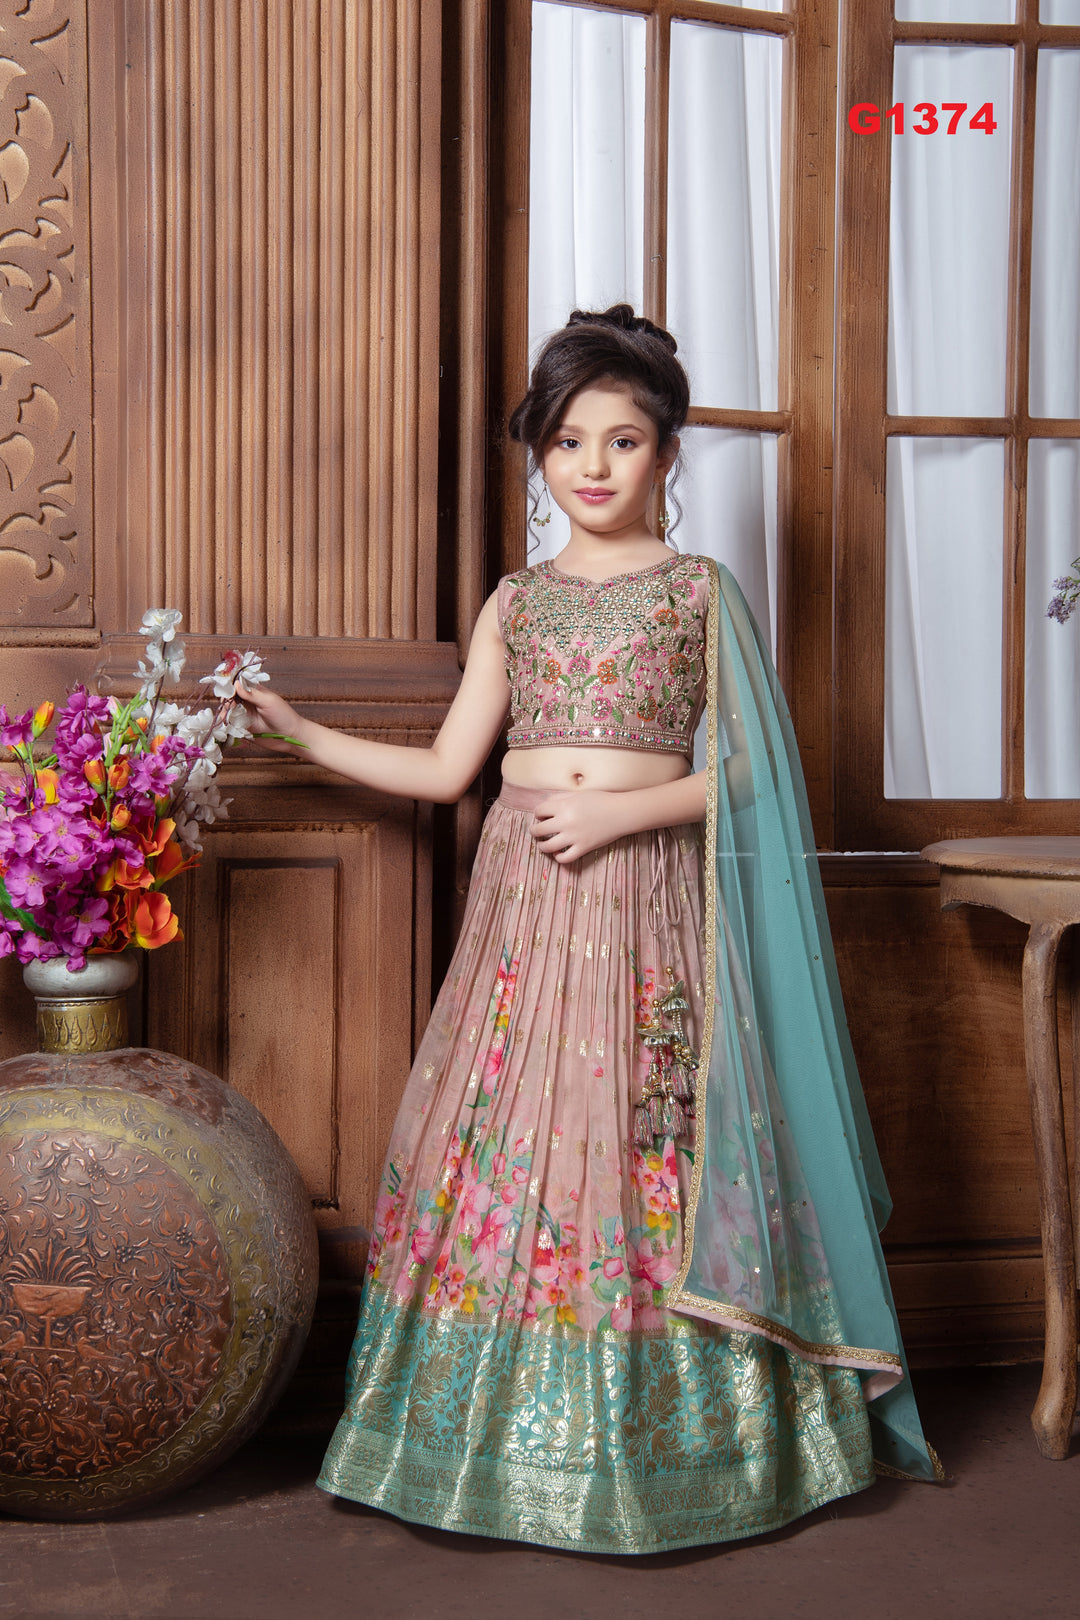 G1374 - Baby pink and blue Partywear Lehenga set